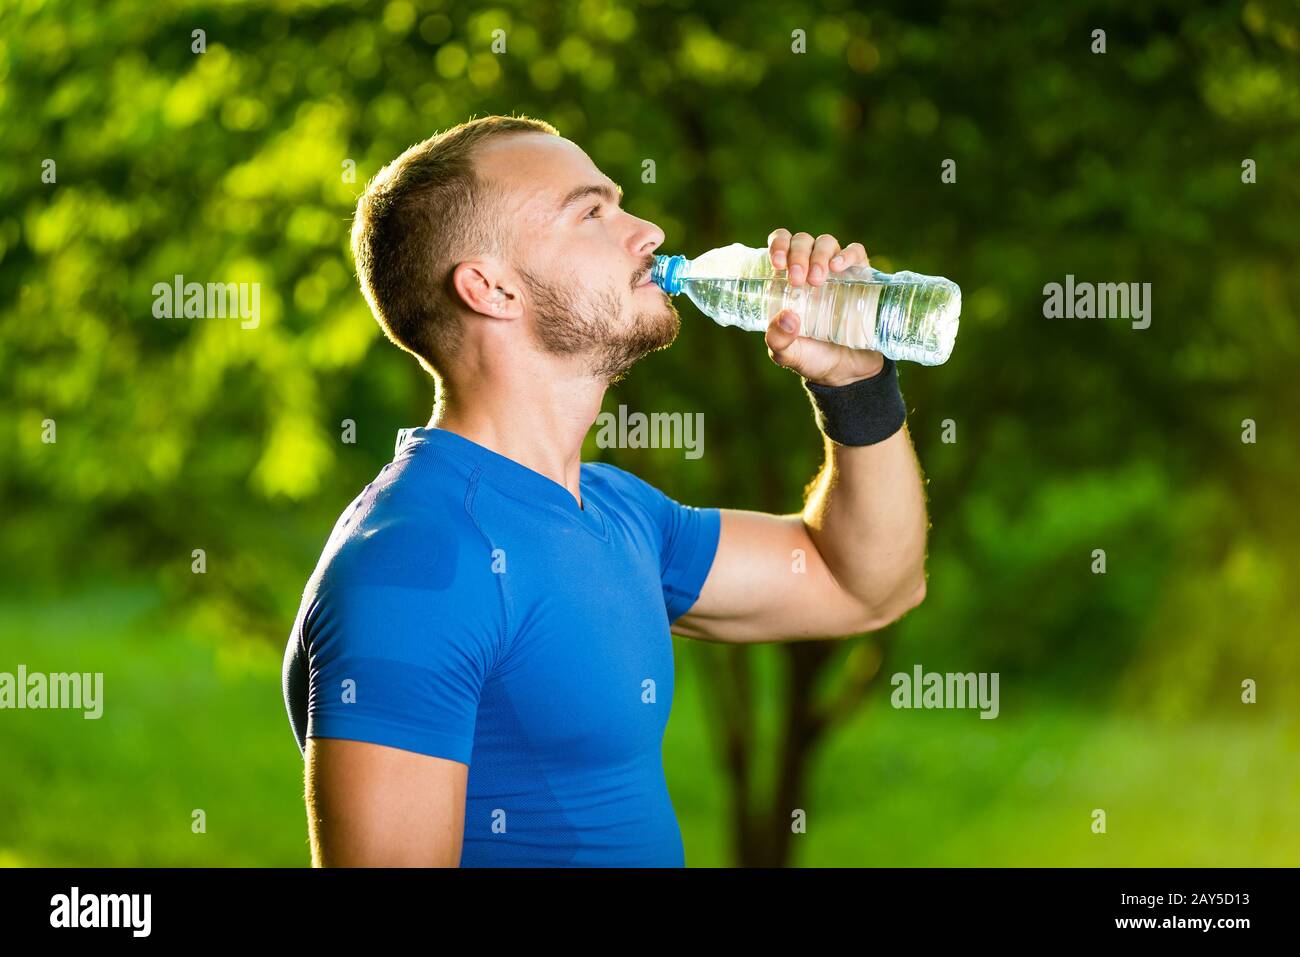 https://c8.alamy.com/comp/2AY5D13/athletic-mature-man-drinking-water-from-a-bottle-2AY5D13.jpg